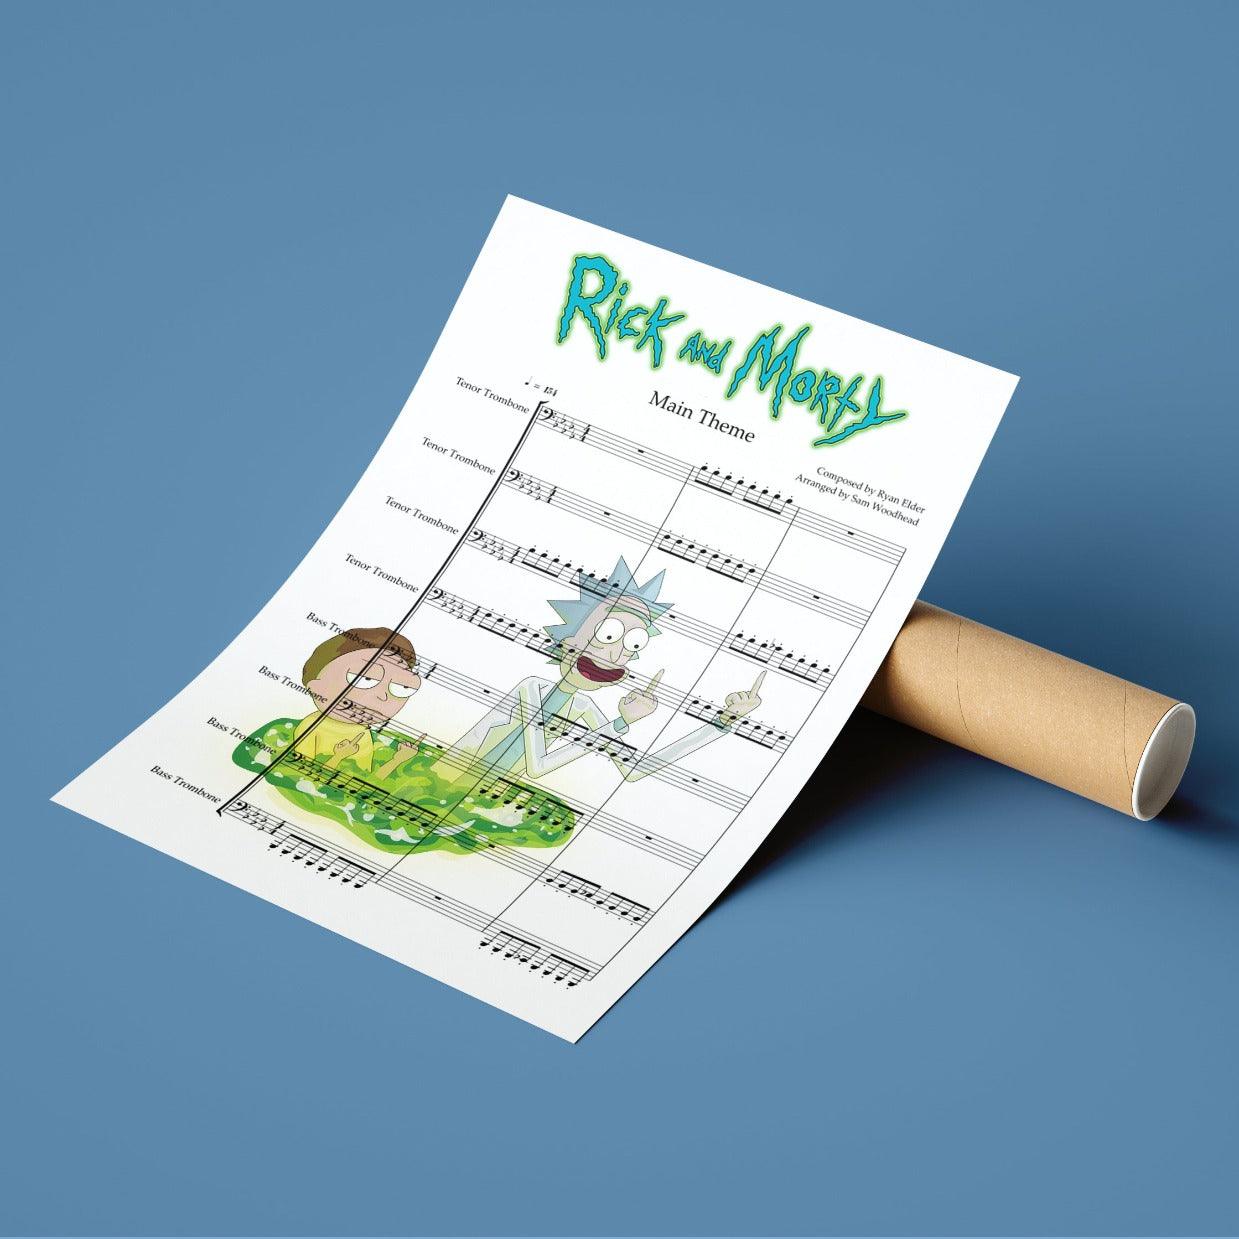 Rick and Morty Main Theme Song  Song Music Sheet Notes Print Everyone has a favorite Song lyric prints and with Rick and Morty now you can show the score as printed staff. The personal favorite song lyrics art shows the song chosen as the score.